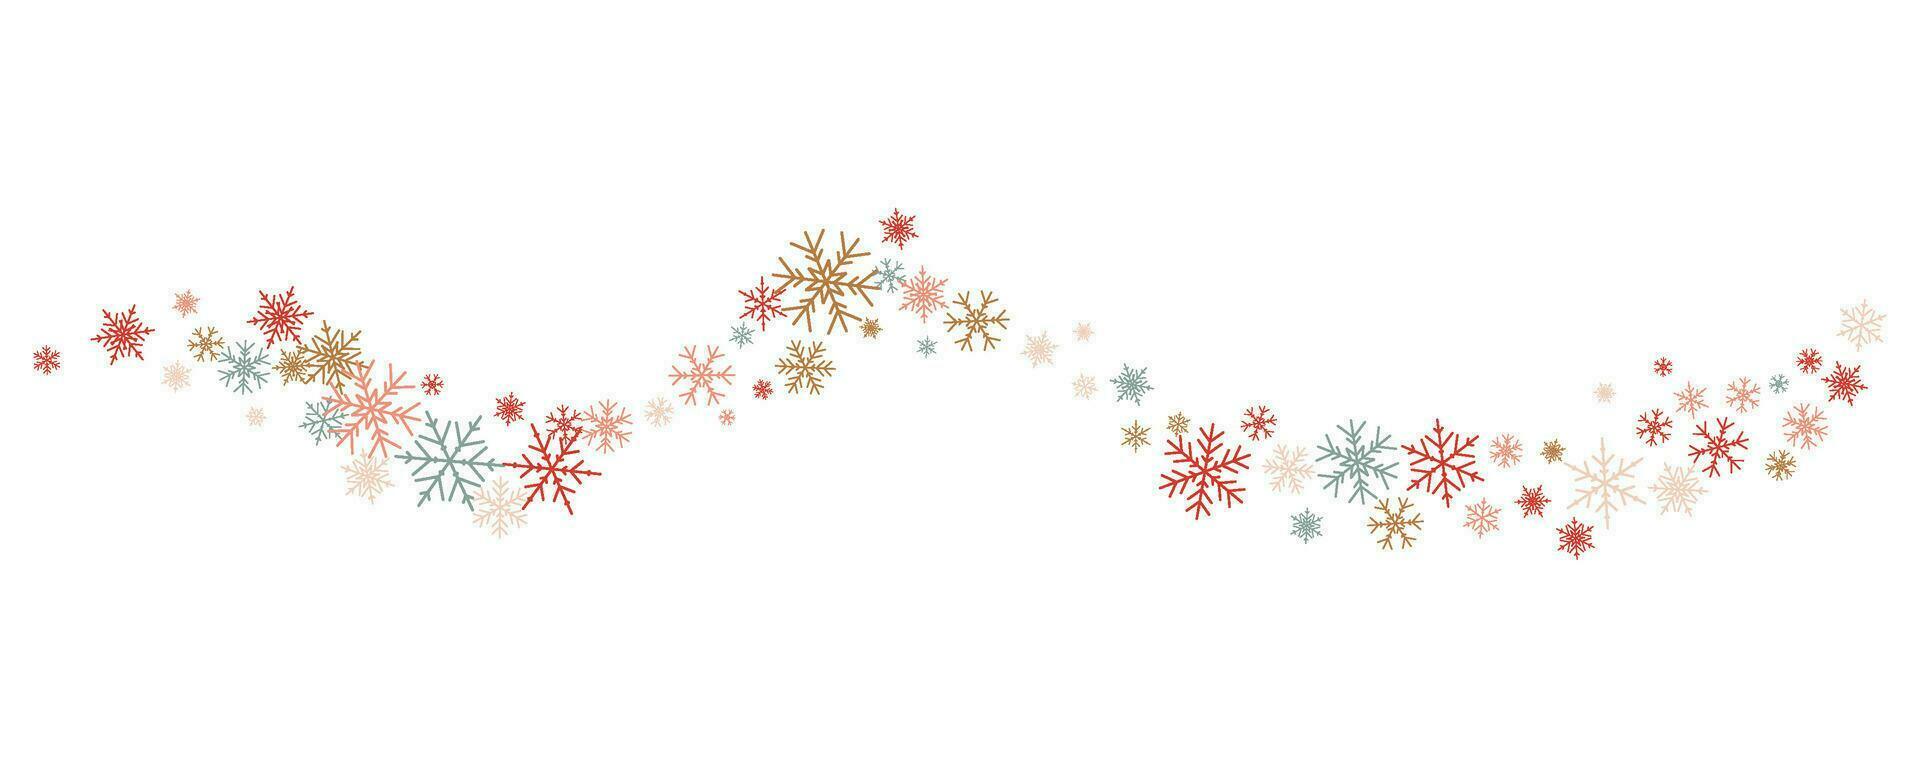 Snowflakes vector background. Winter holiday decor with multicolor crystal elements. Graphic icy wave isolated on white backdrop.